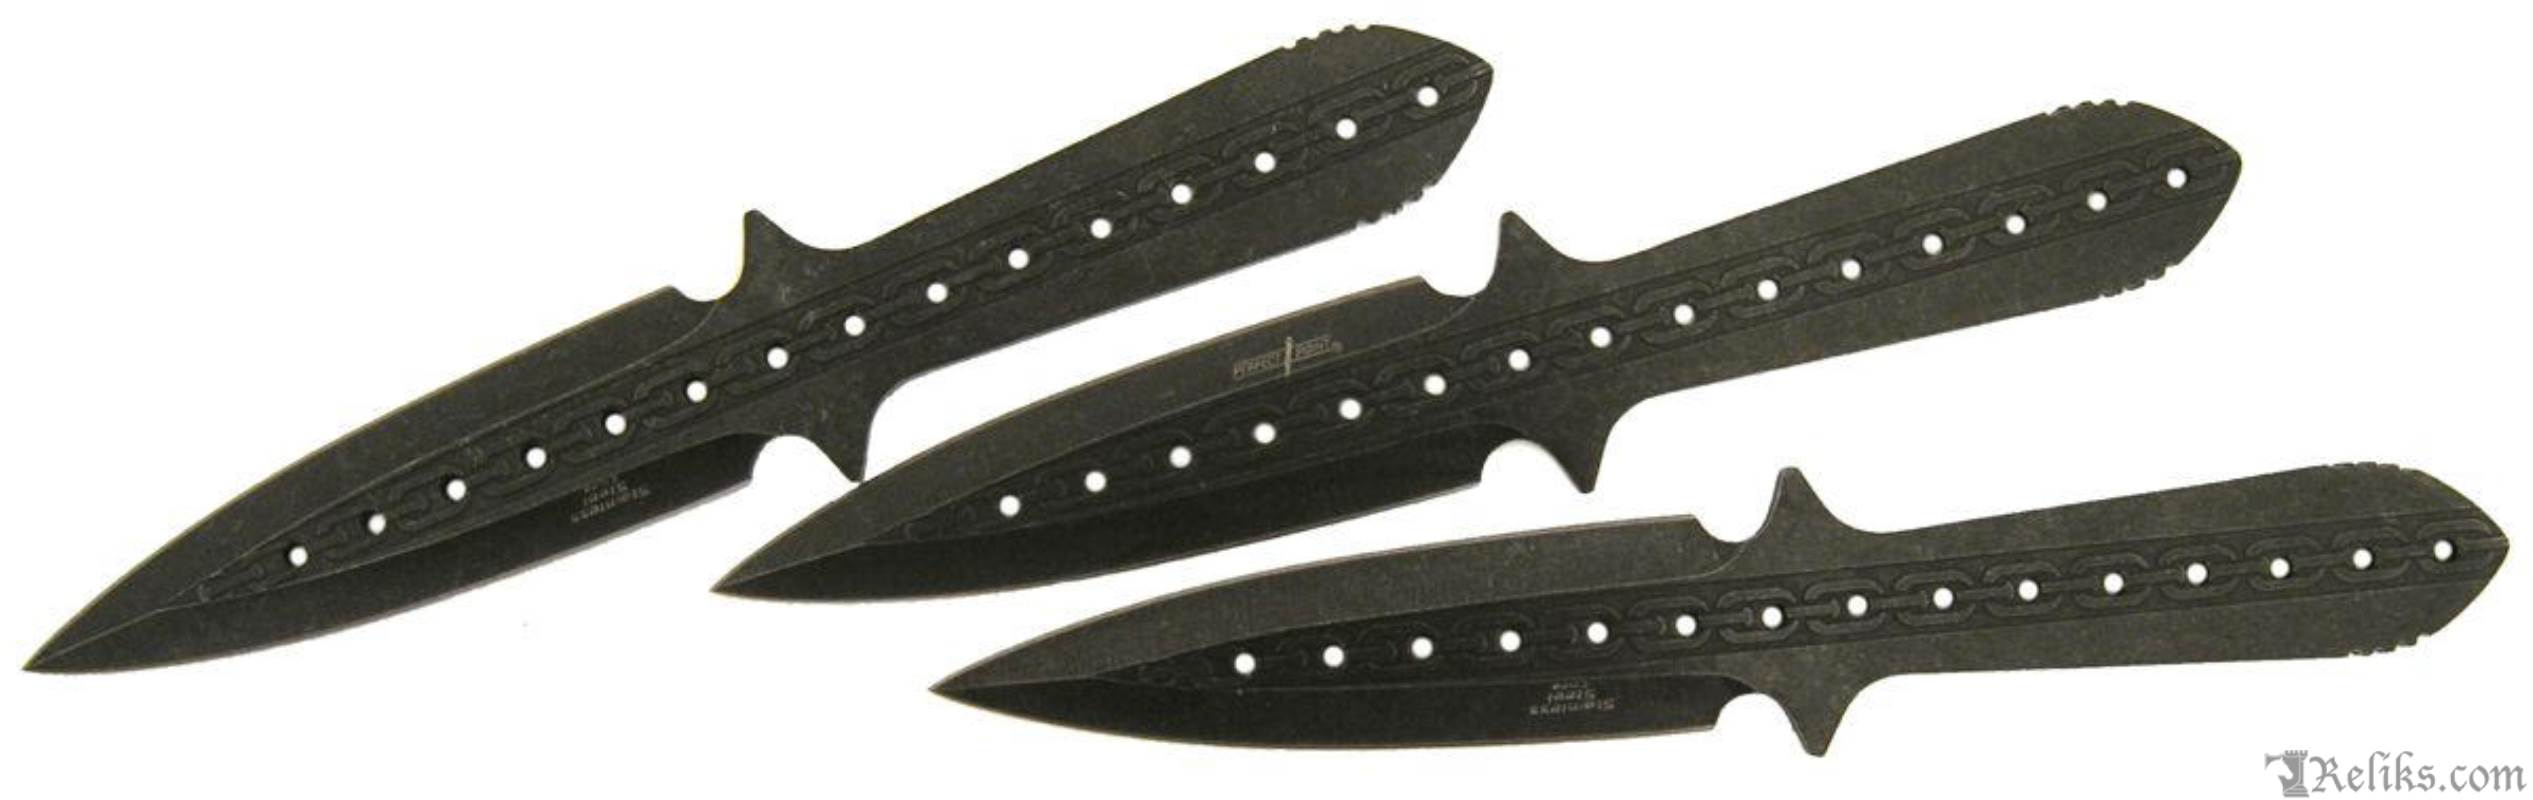 stone washed throwing knives